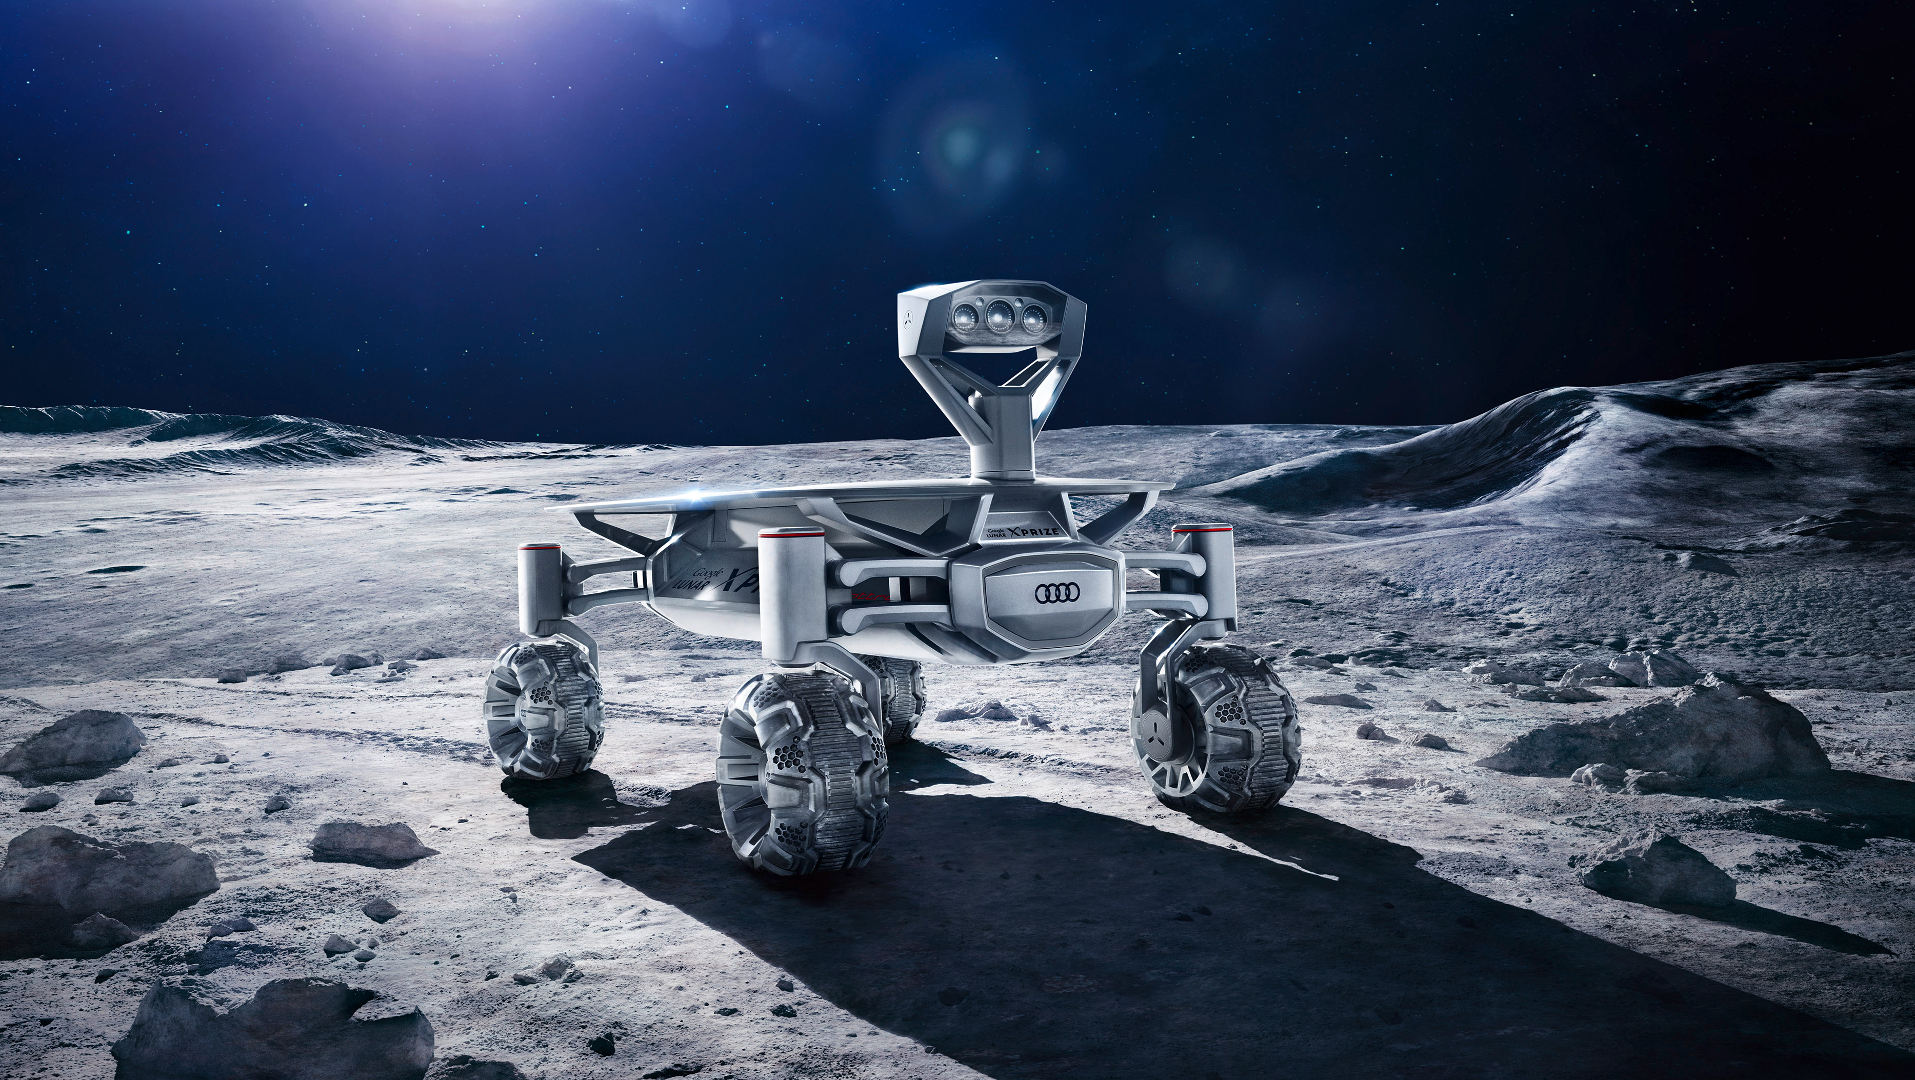 German Mission To The Moon Will Prove The Apollo Landings Weren’t A Hoax